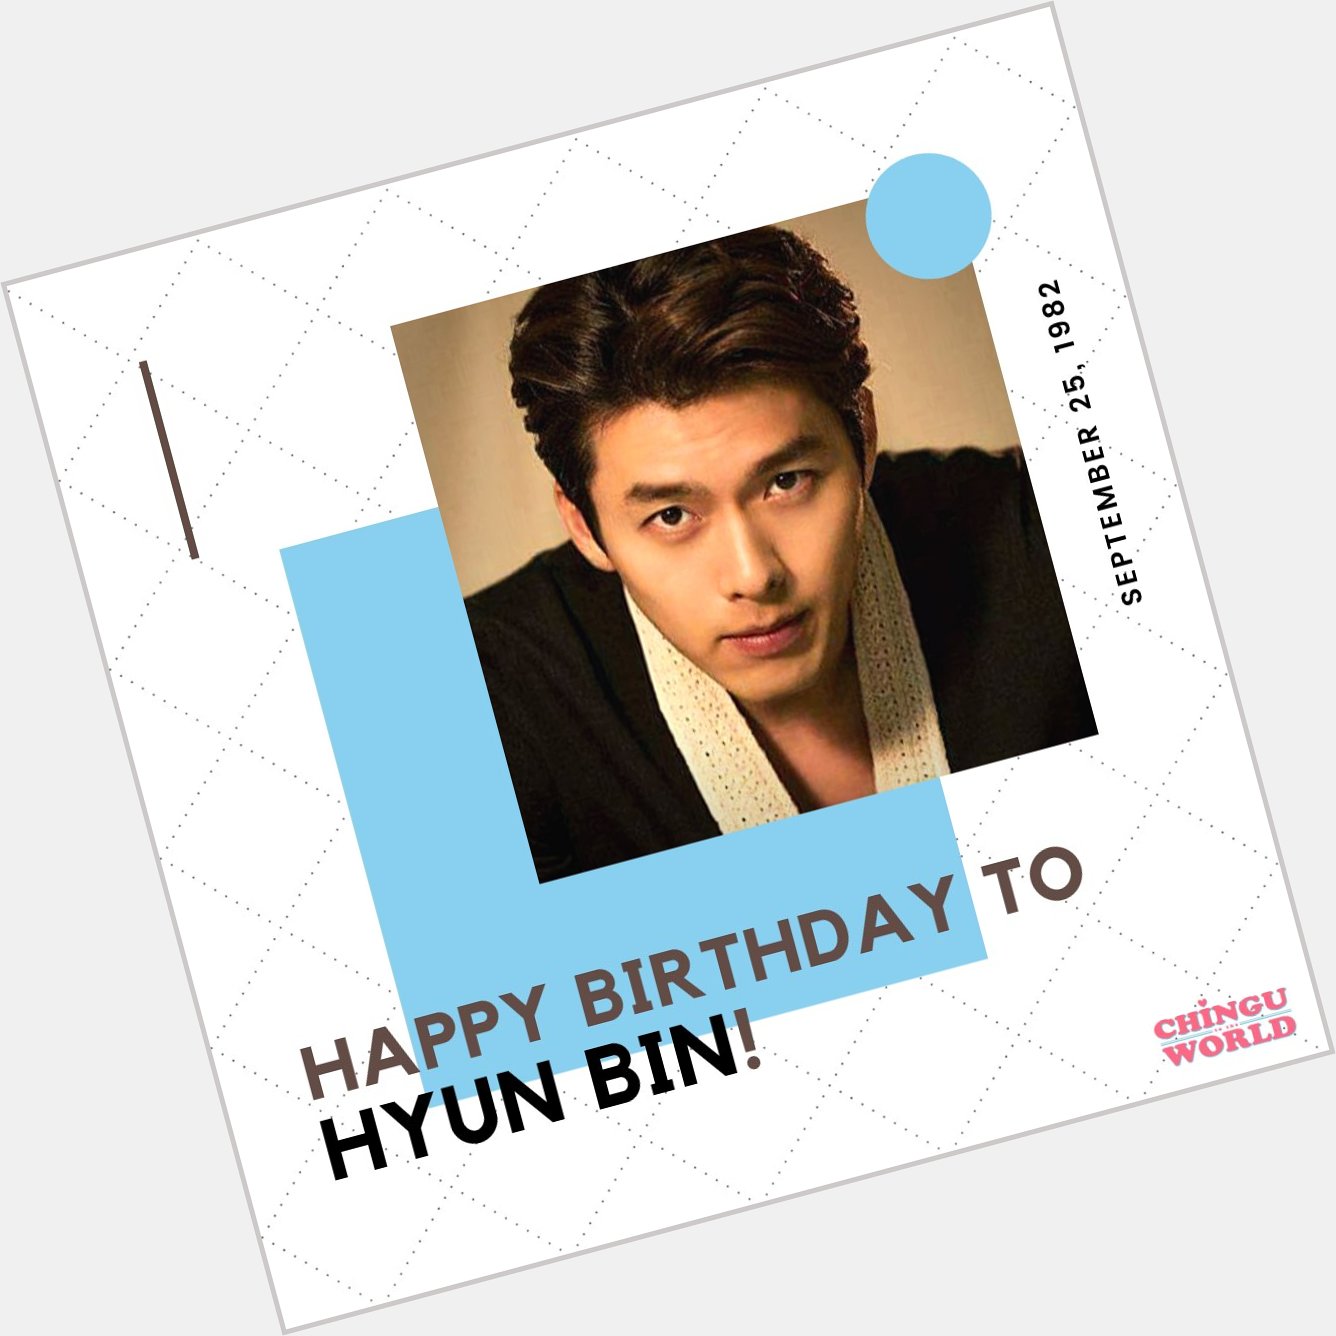 Happy birthday to one of the most promising and remarkable actors in South Korea, Hyun Bin!  